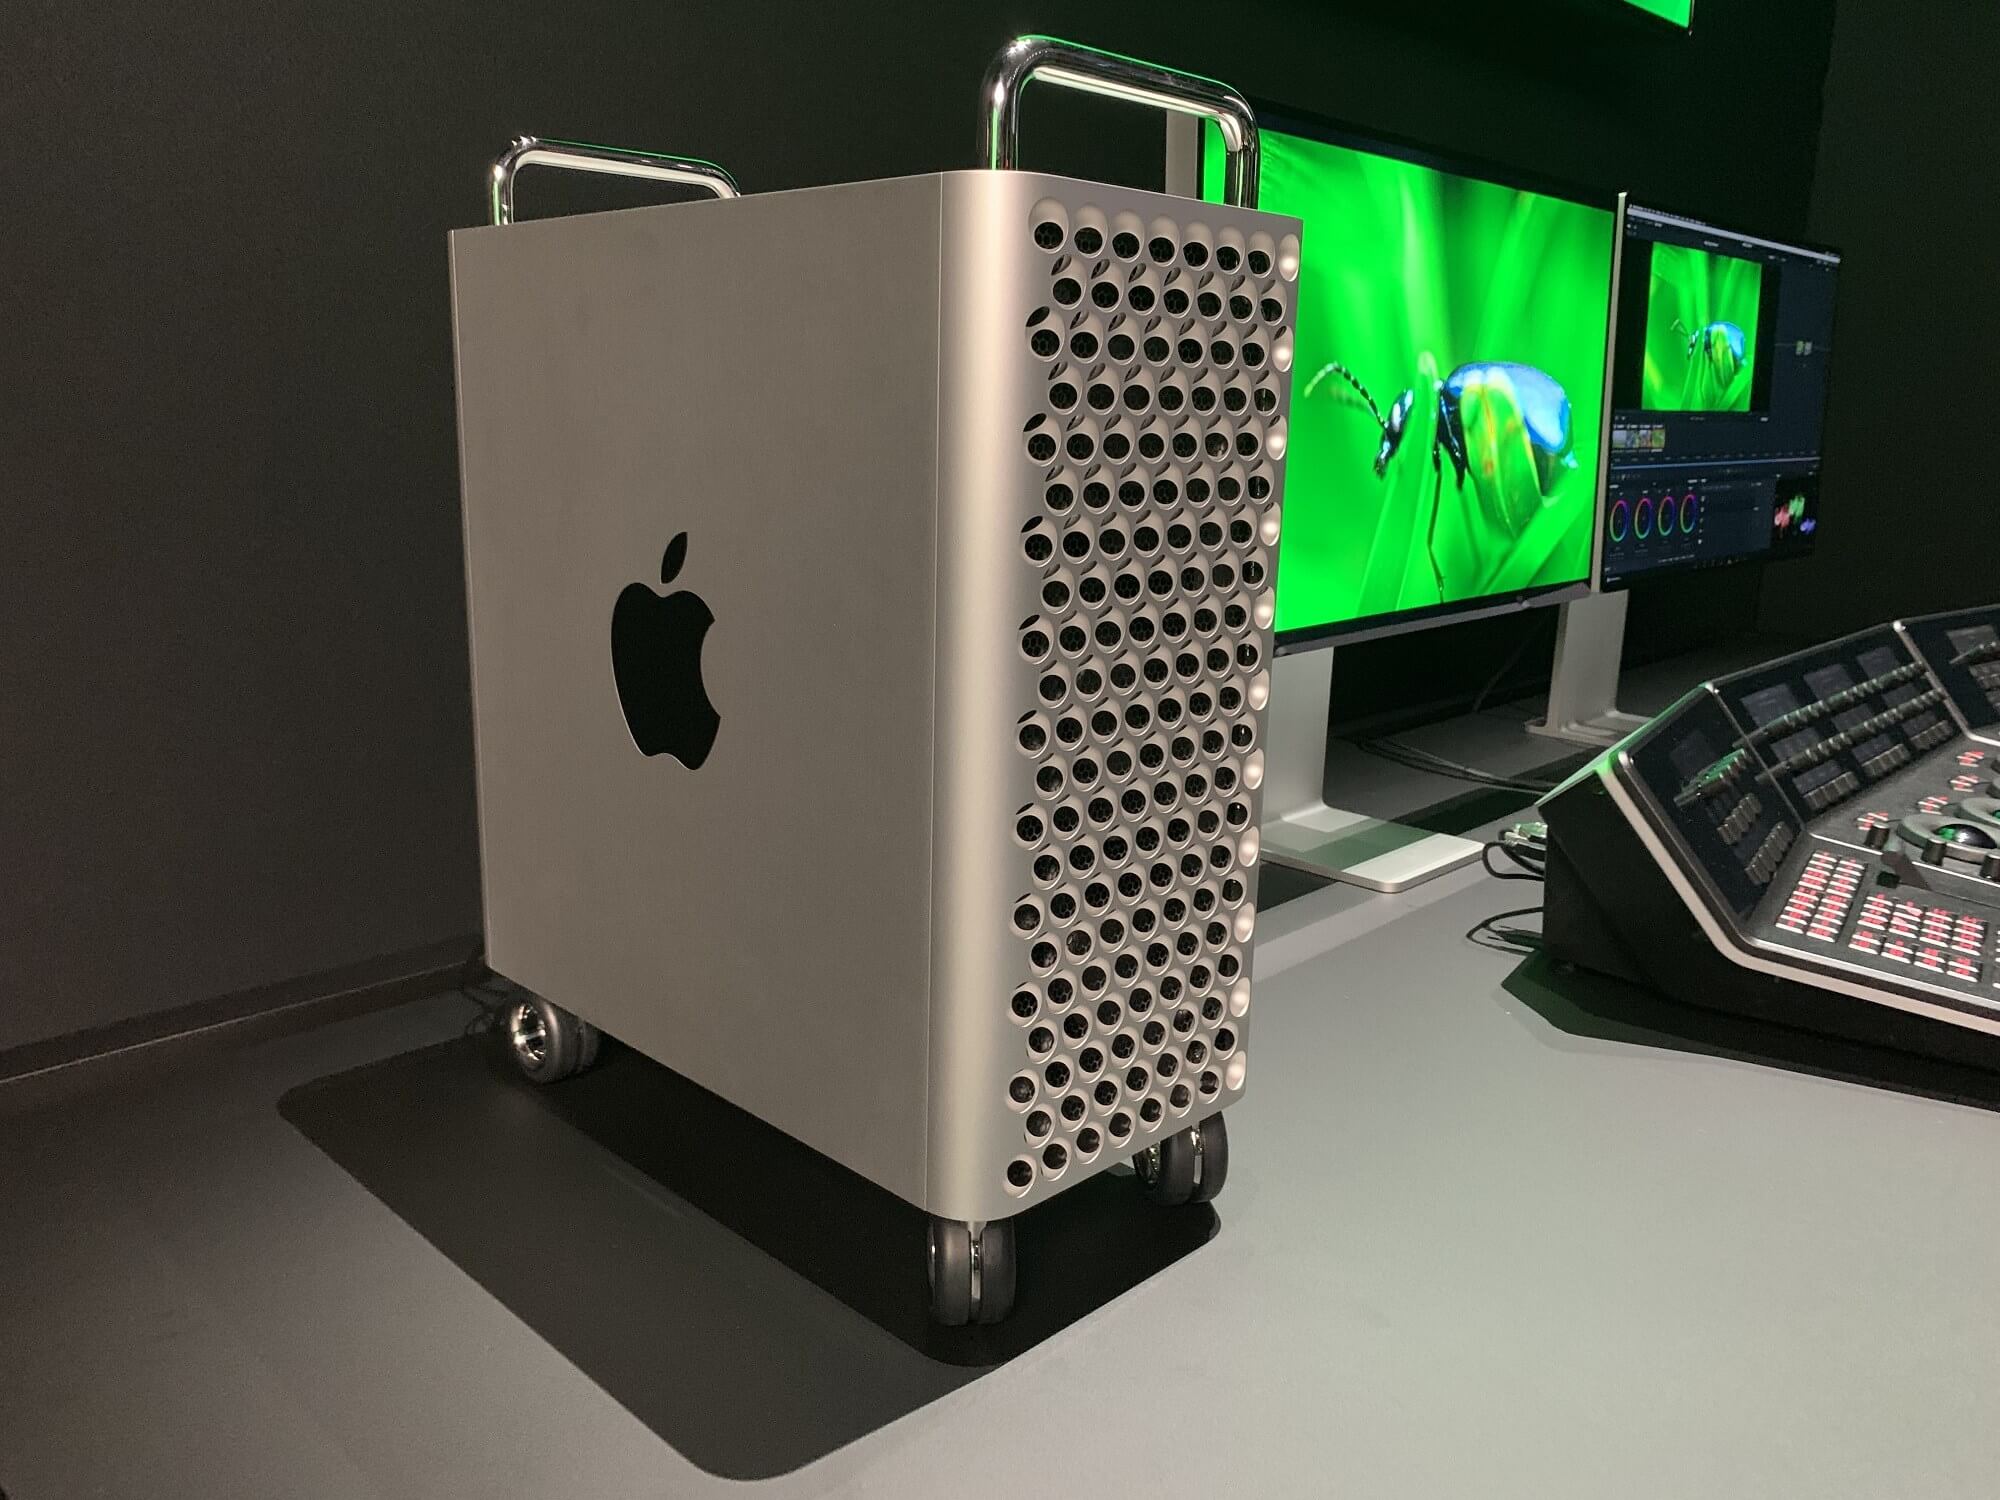 A 64-core Mac Pro priced at $19,000+ rumored to arrive next year